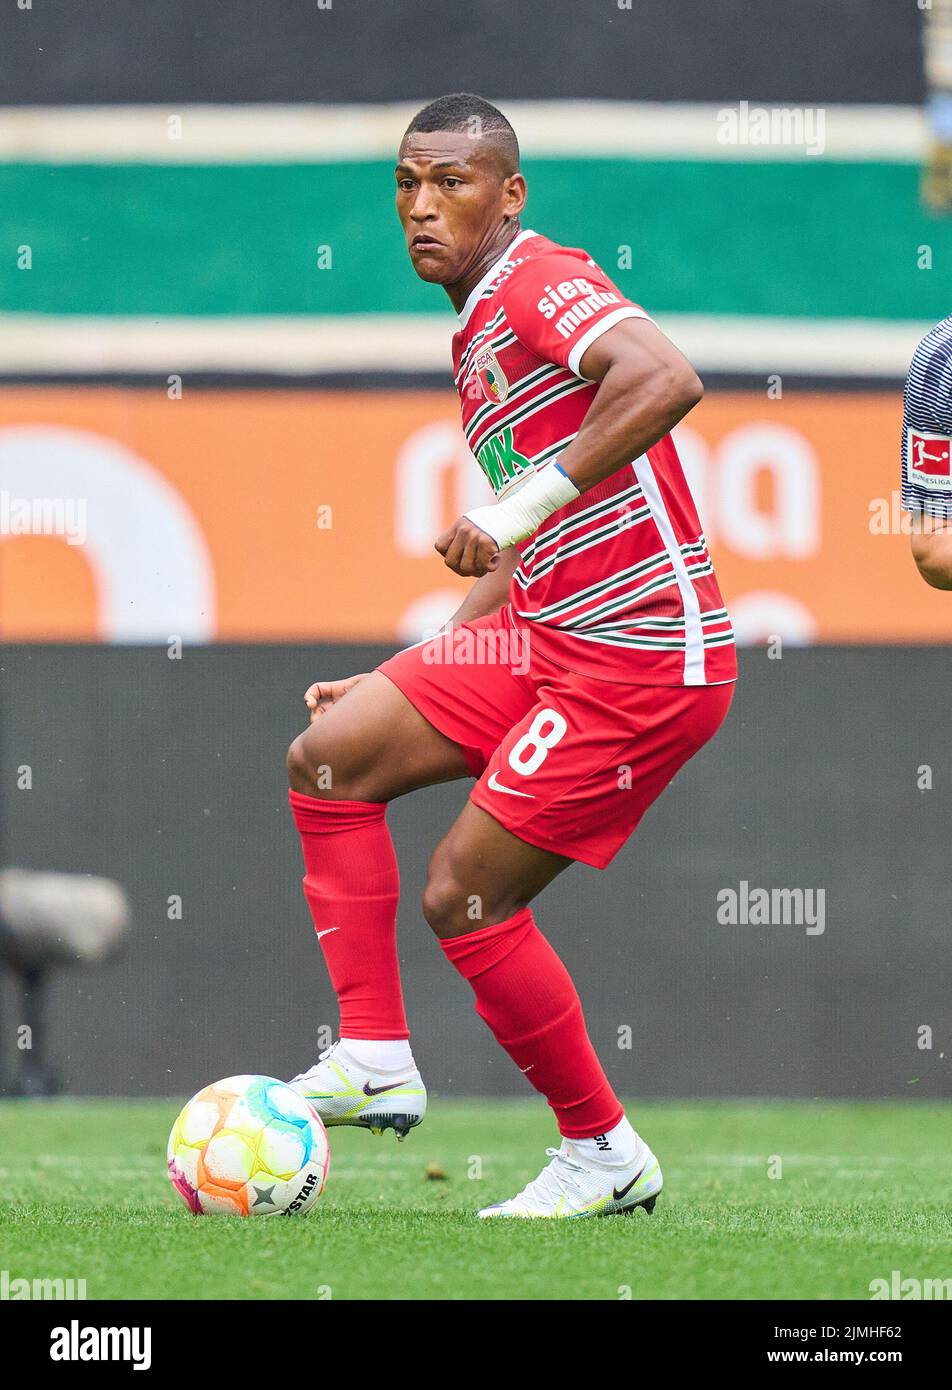 Carlos Gruezo, FCA 8  in the match FC AUGSBURG - SC FREIBURG 0-4 1.German Football League on Aug 06, 2022 in Augsburg, Germany. Season 2022/2023, matchday 1, 1.Bundesliga, FCB, Munich, 1.Spieltag © Peter Schatz / Alamy Live News    - DFL REGULATIONS PROHIBIT ANY USE OF PHOTOGRAPHS as IMAGE SEQUENCES and/or QUASI-VIDEO - Stock Photo